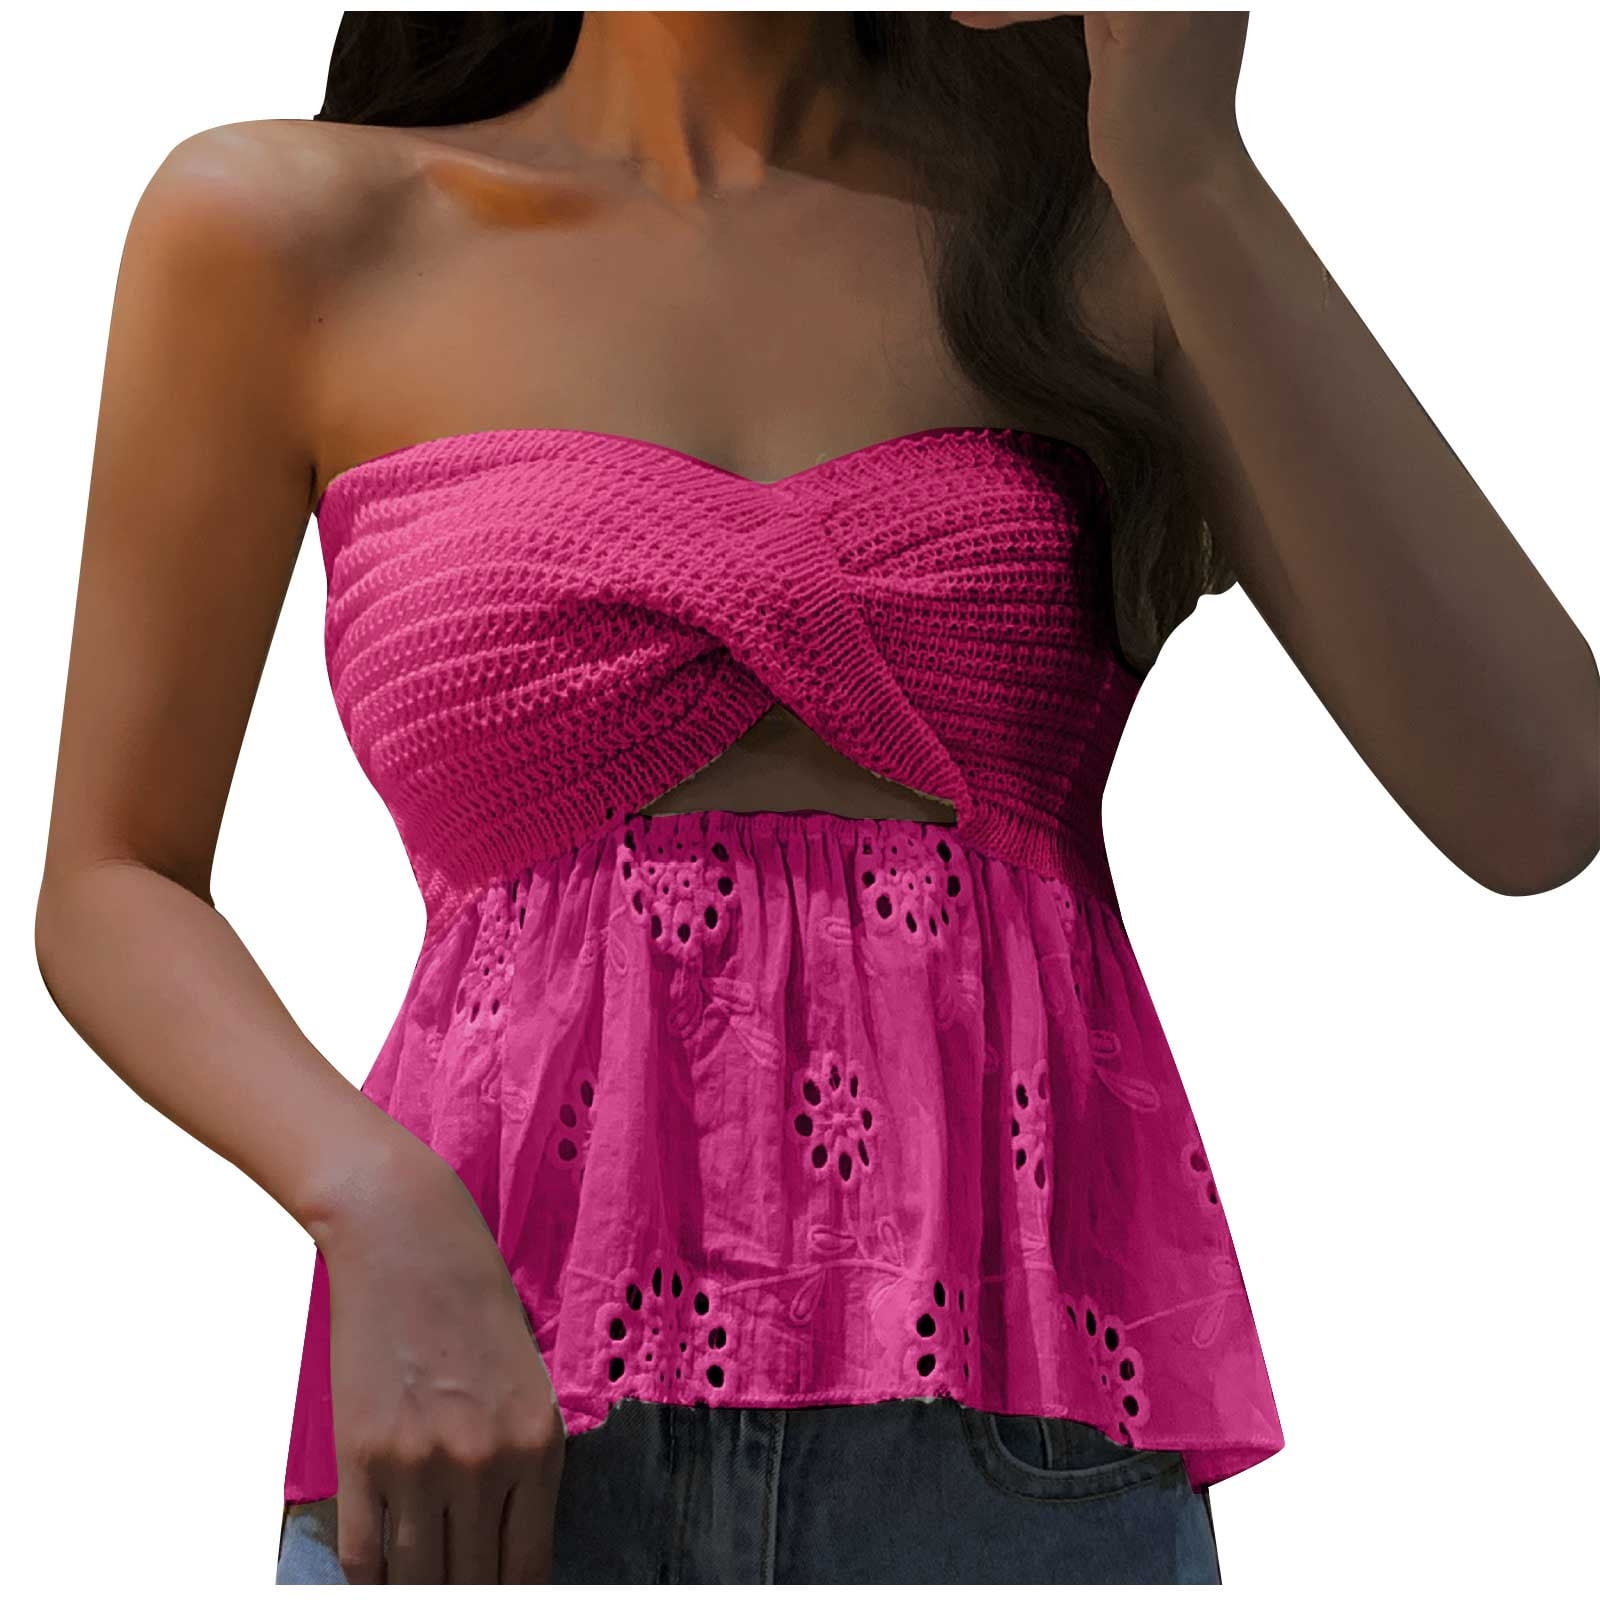 Womenacute;s Lace Tube Tops, Strapless Tie-Up Front Eyelet Embroidery  Bandeau Crop Tops（S,M,L） 